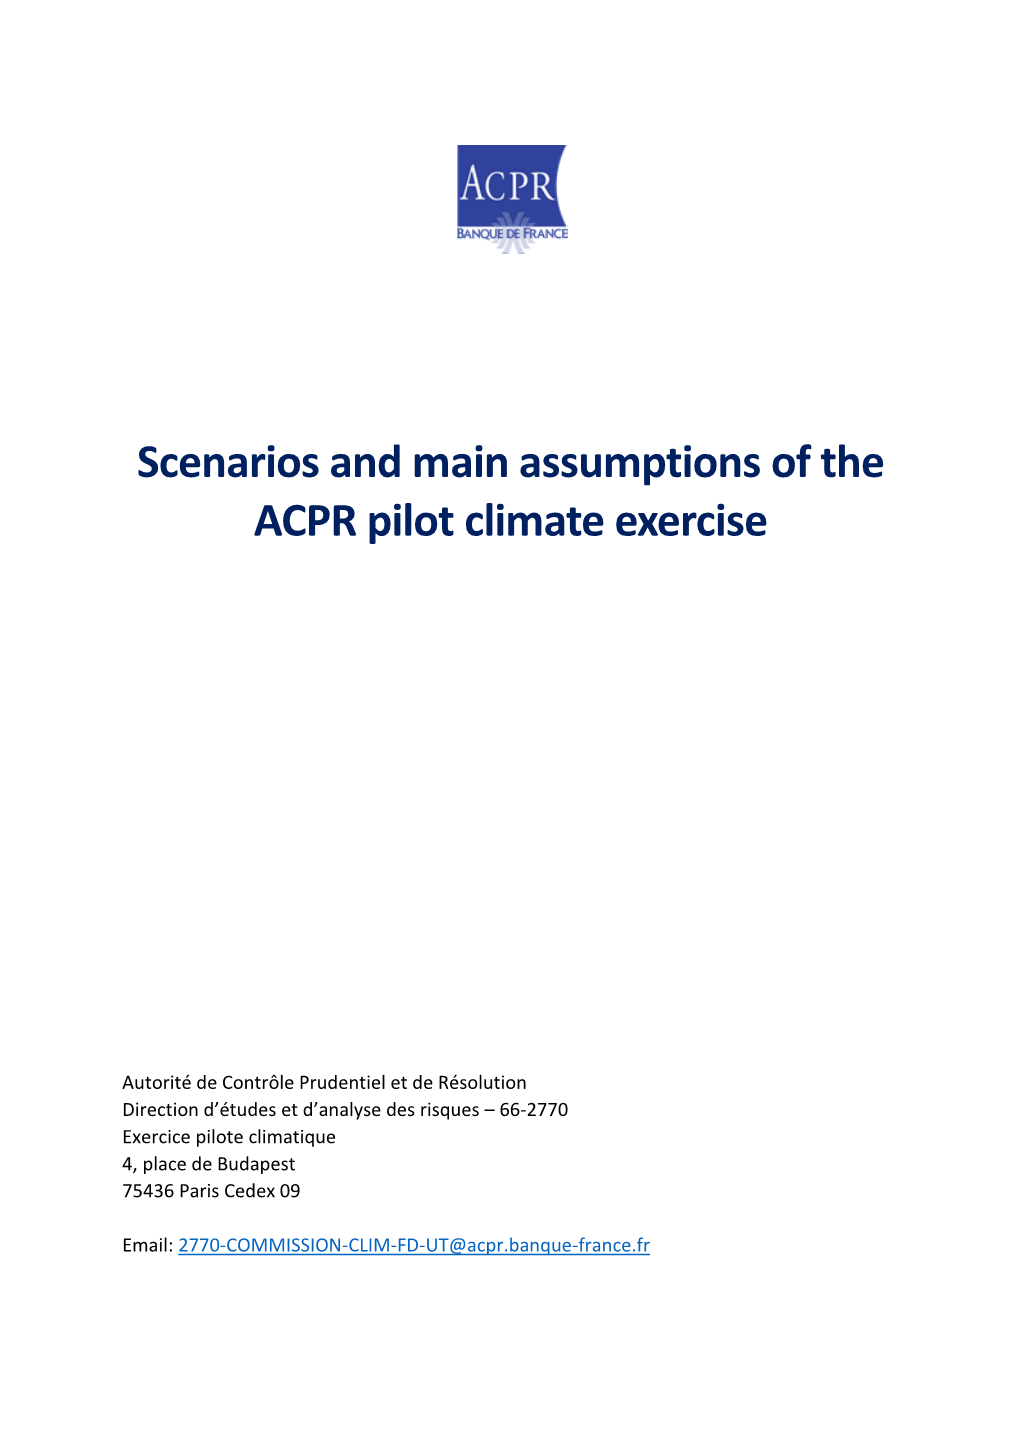 Scenarios and Main Assumptions of the ACPR Pilot Climate Exercise